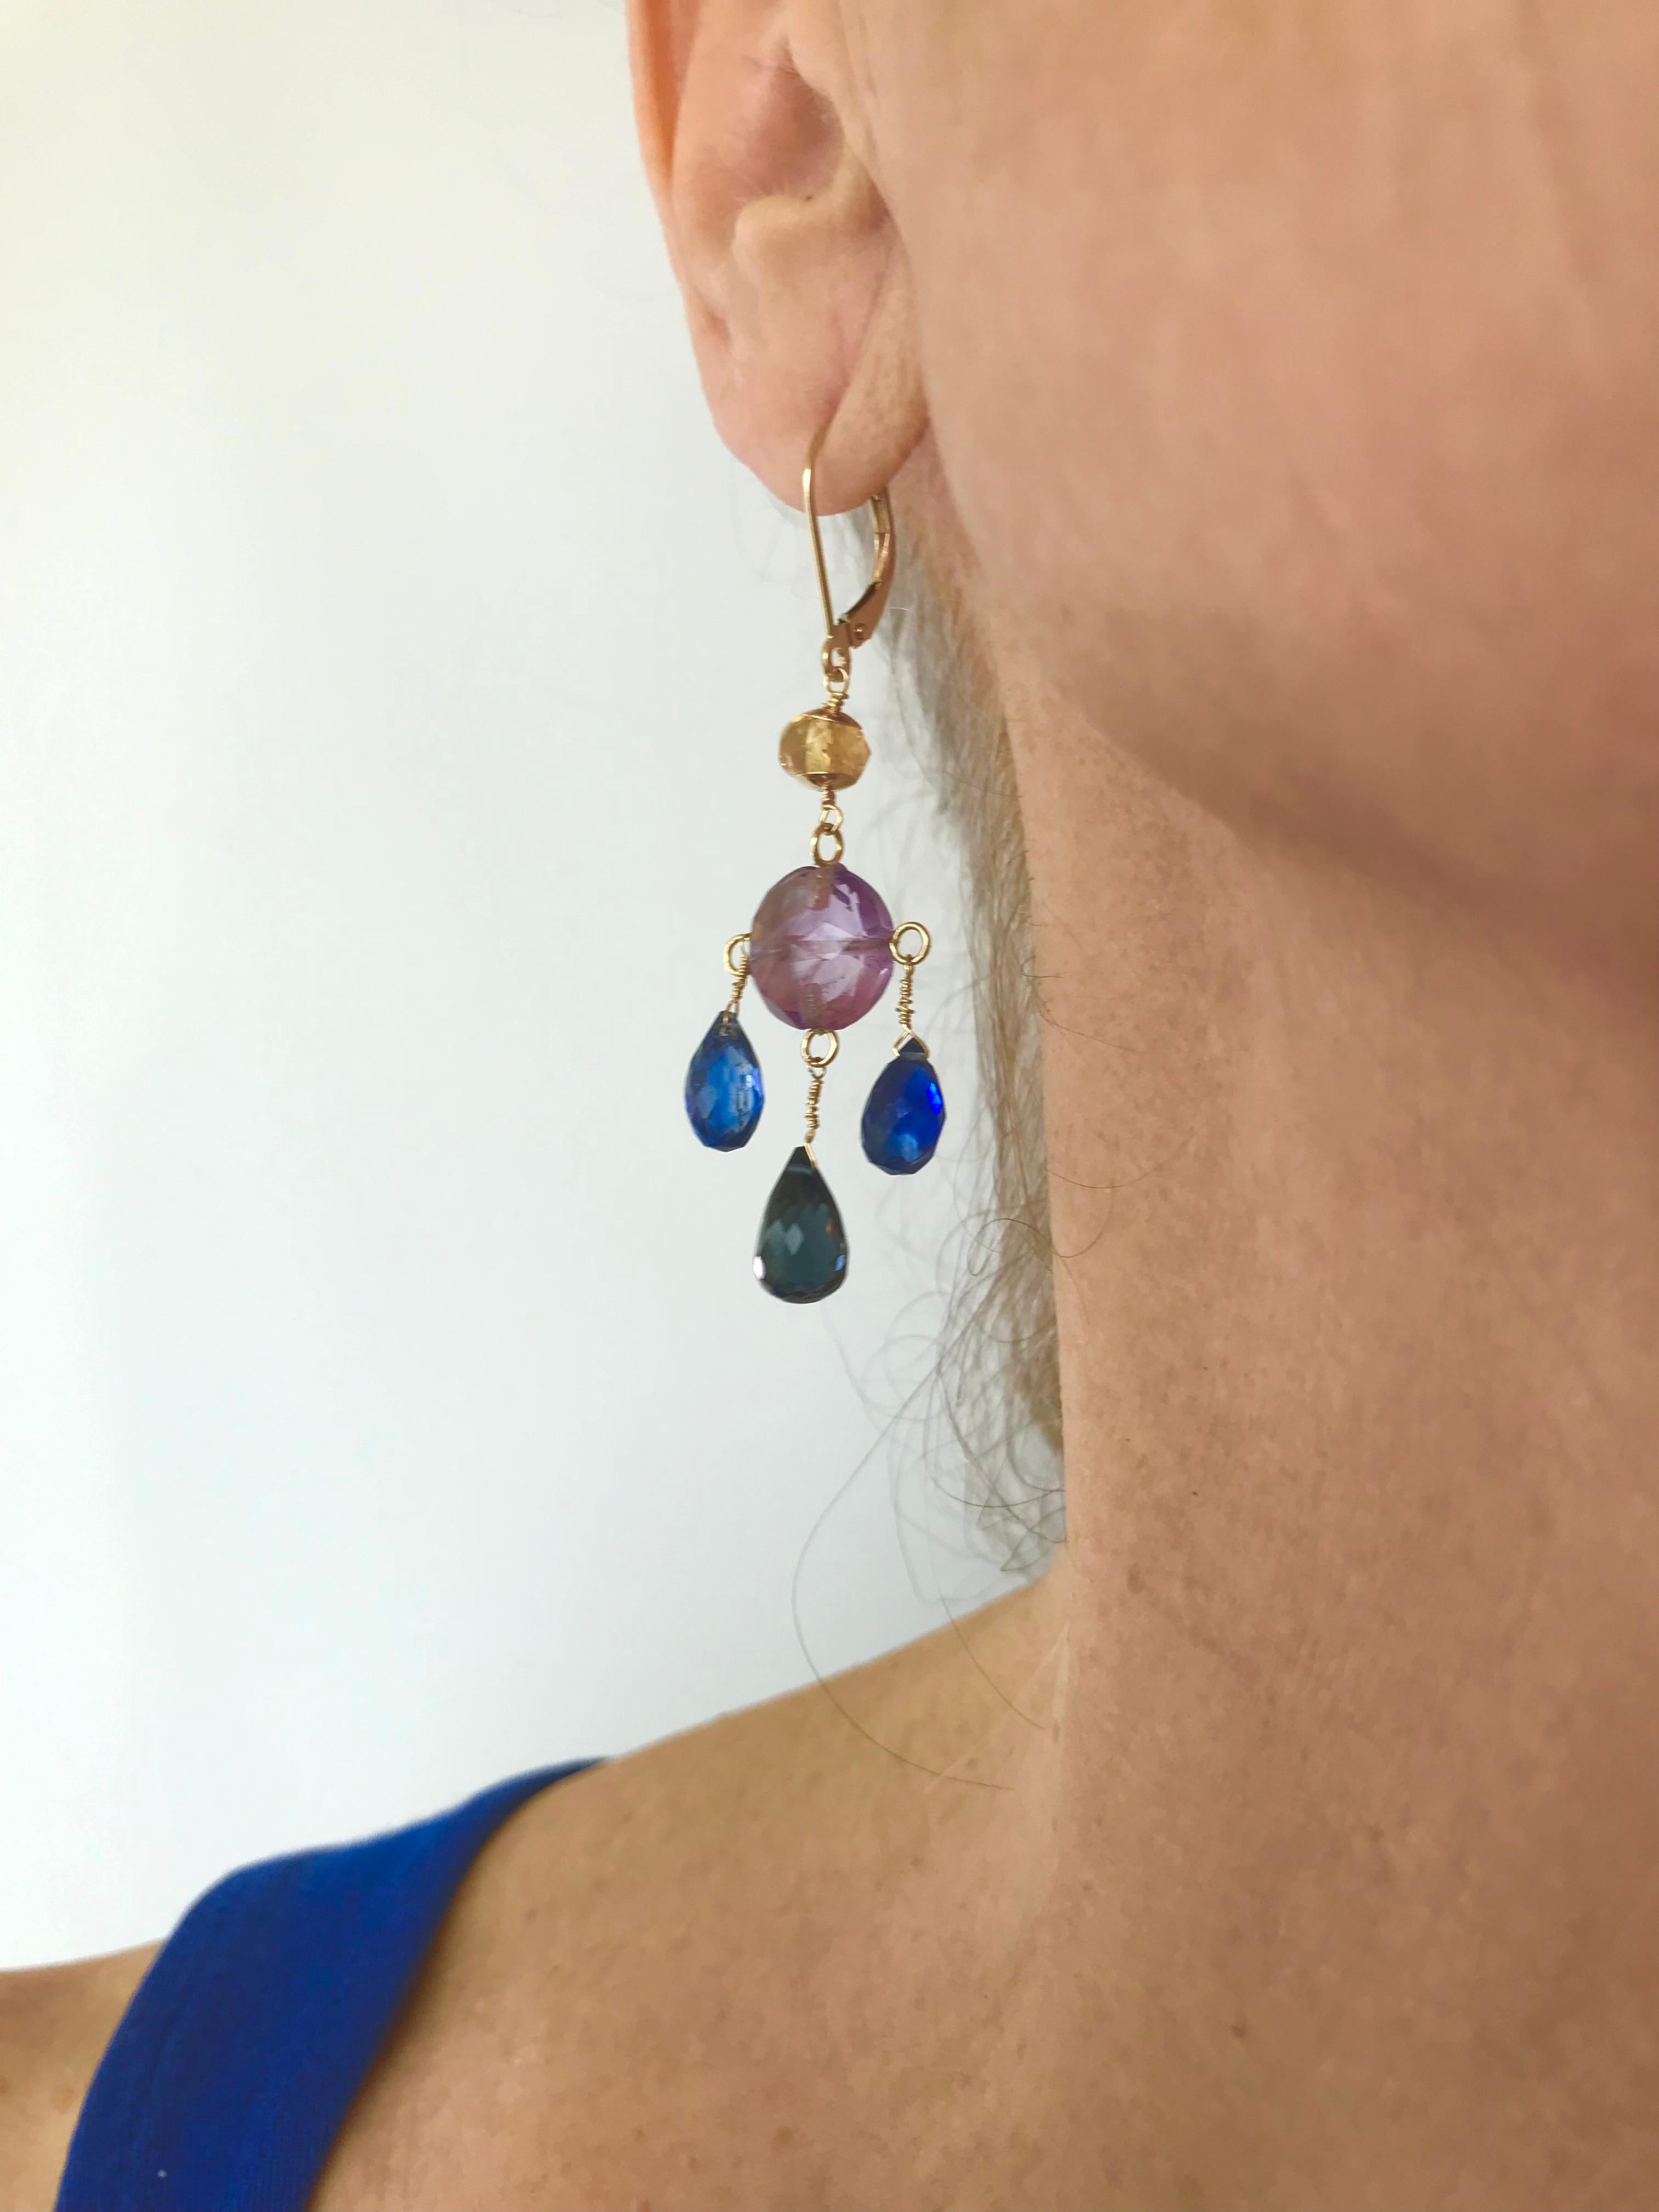 Gorgeous pair of small Chandelier Earrings by Marina J. This colorful pair features a beautiful Amethyst center bead from which two small bright Blue Kyanite teardrop Briolettes hang, and a larger, deep London Blue Topaz teardrop Briolette hangs